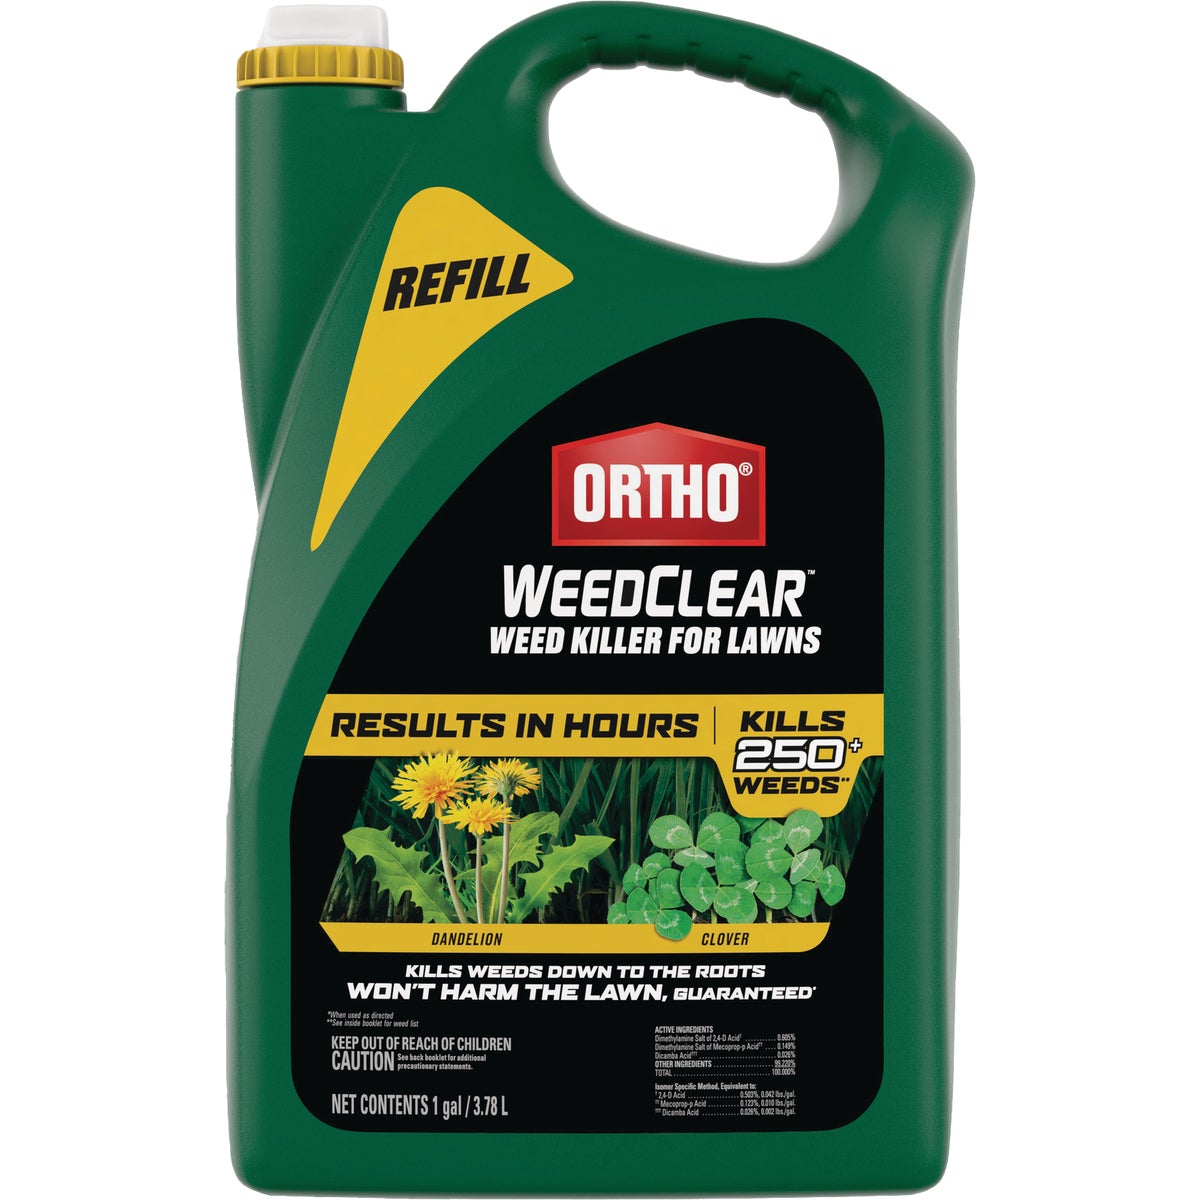 Ortho WeedClear 1 Gal. Ready To Use Refill Lawn Weed Killer